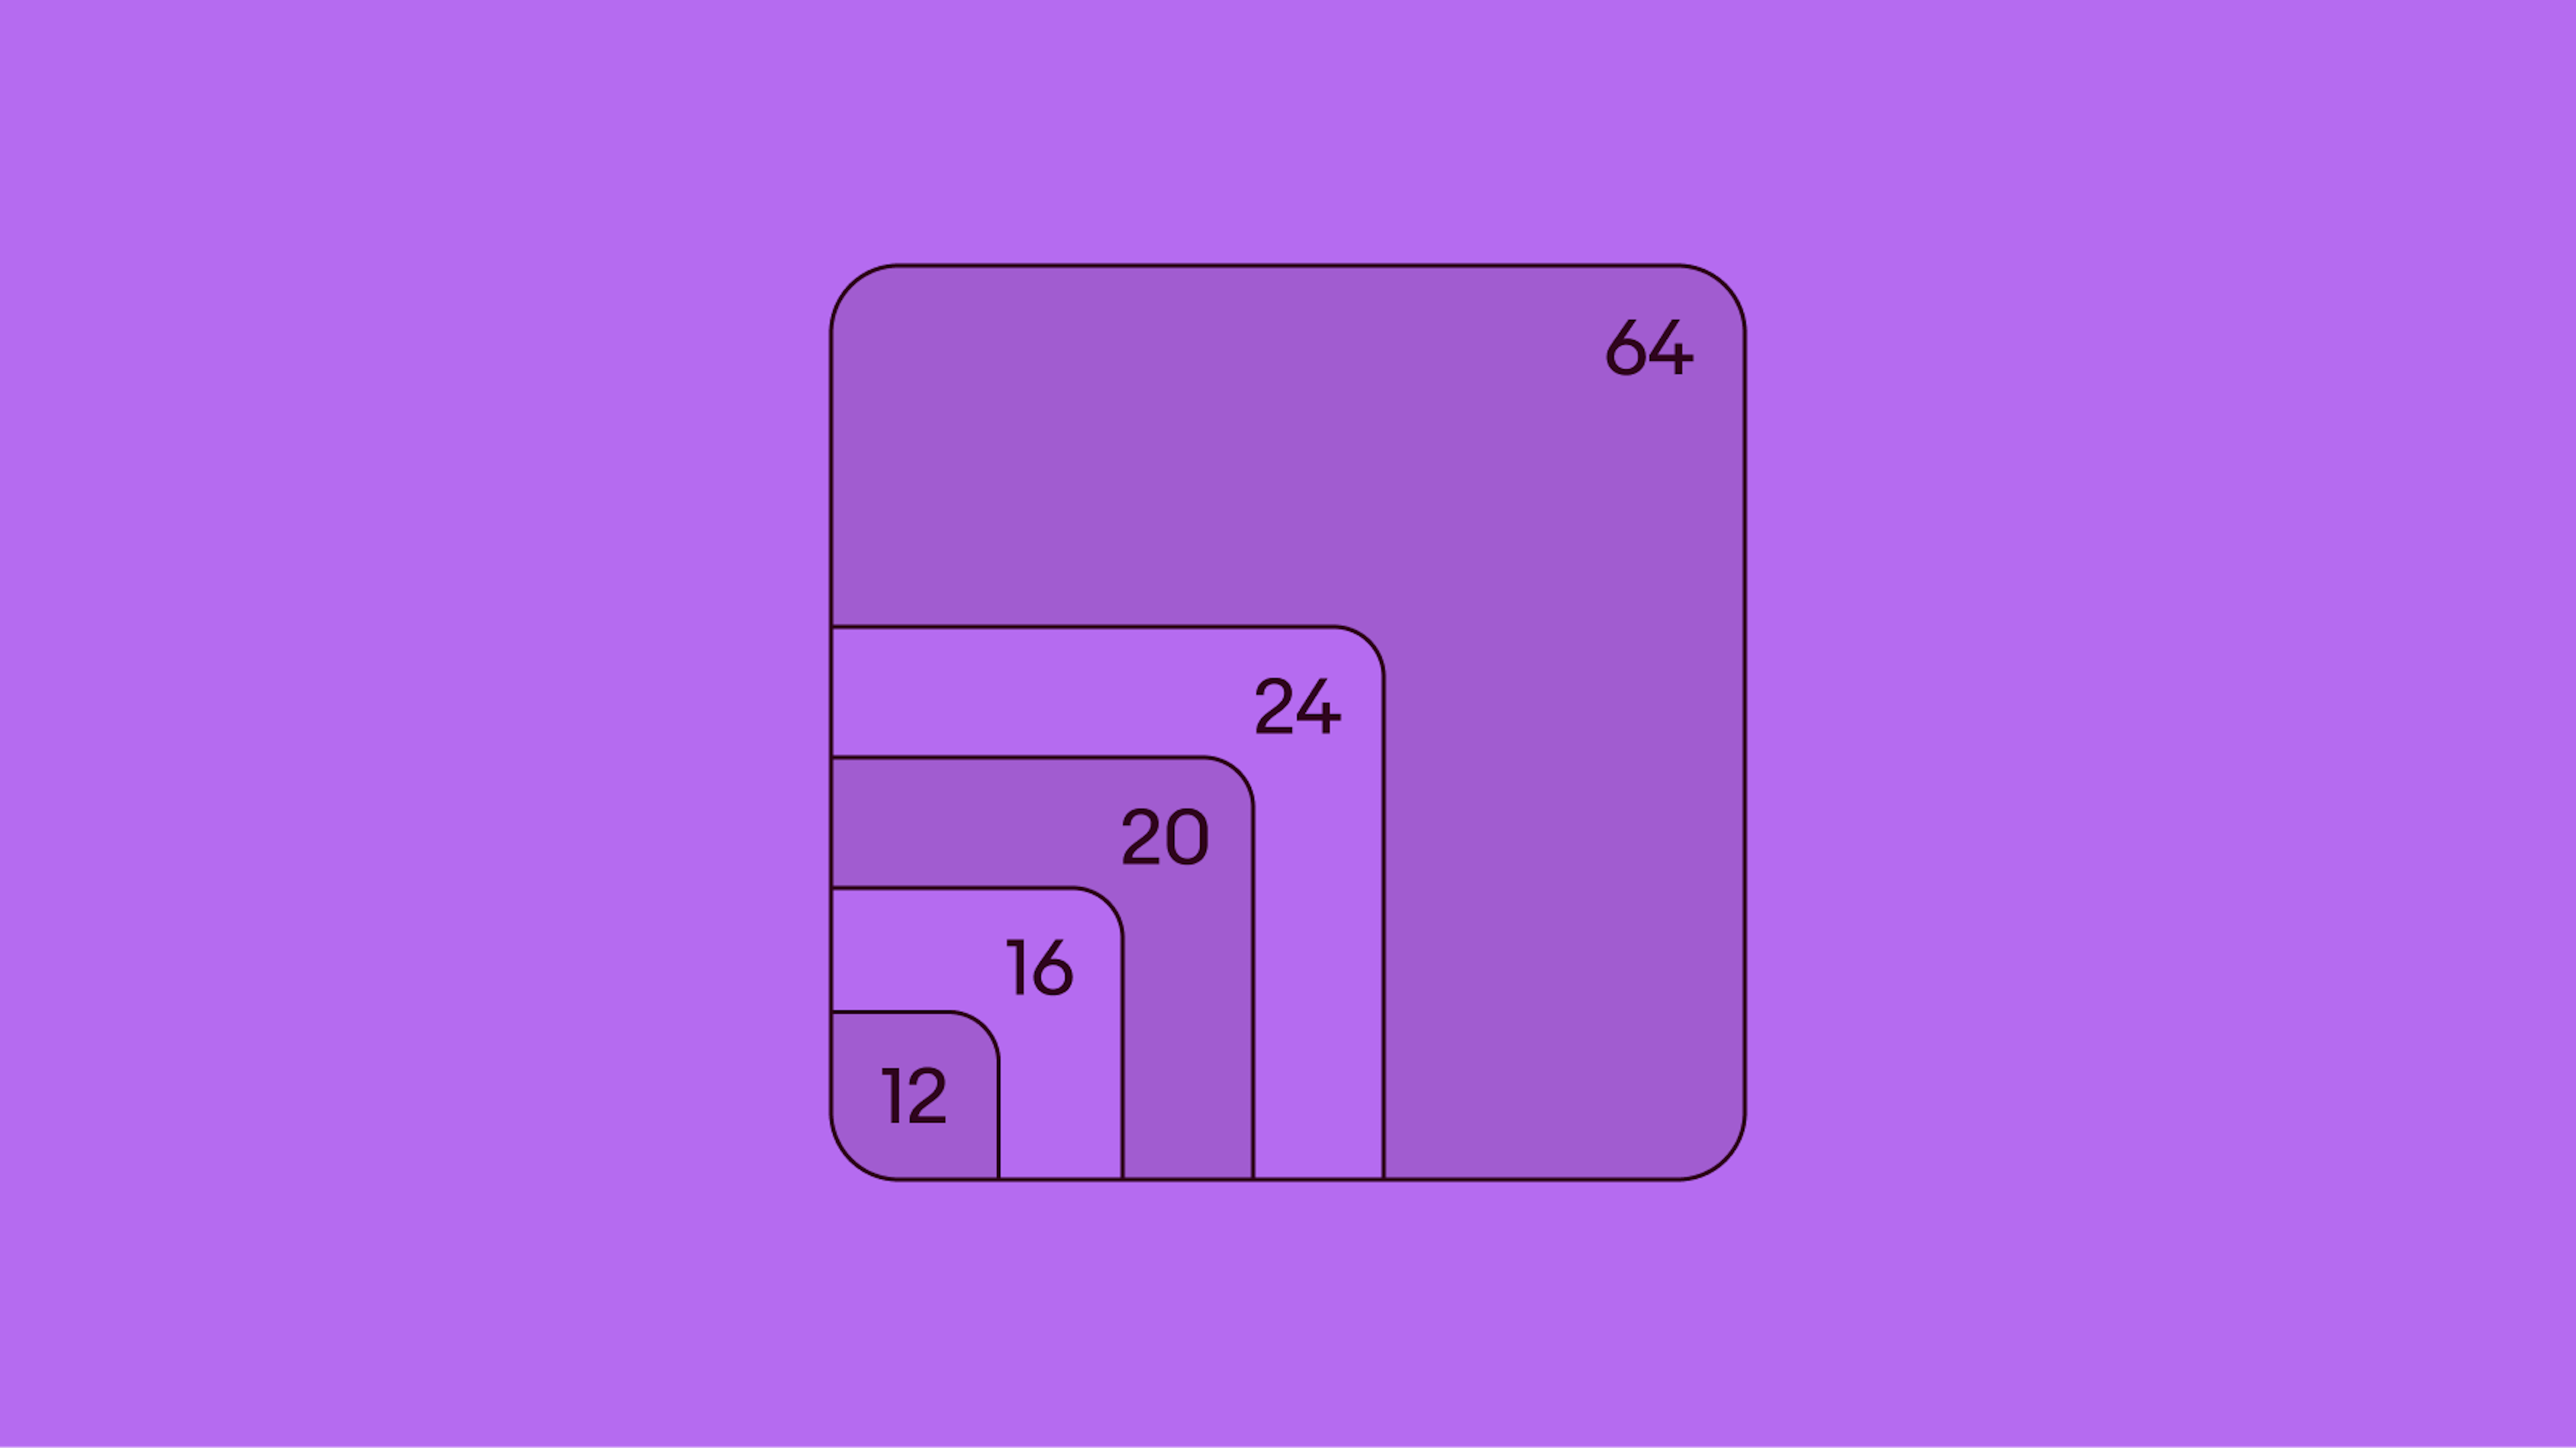 An illustrative graphic of a large square with nested squares inside. The squares are staggered overlapping in a diagonal pattern from bottom left to upper right. The squares increase in size with the text 12, 16, 20, 24, 64.